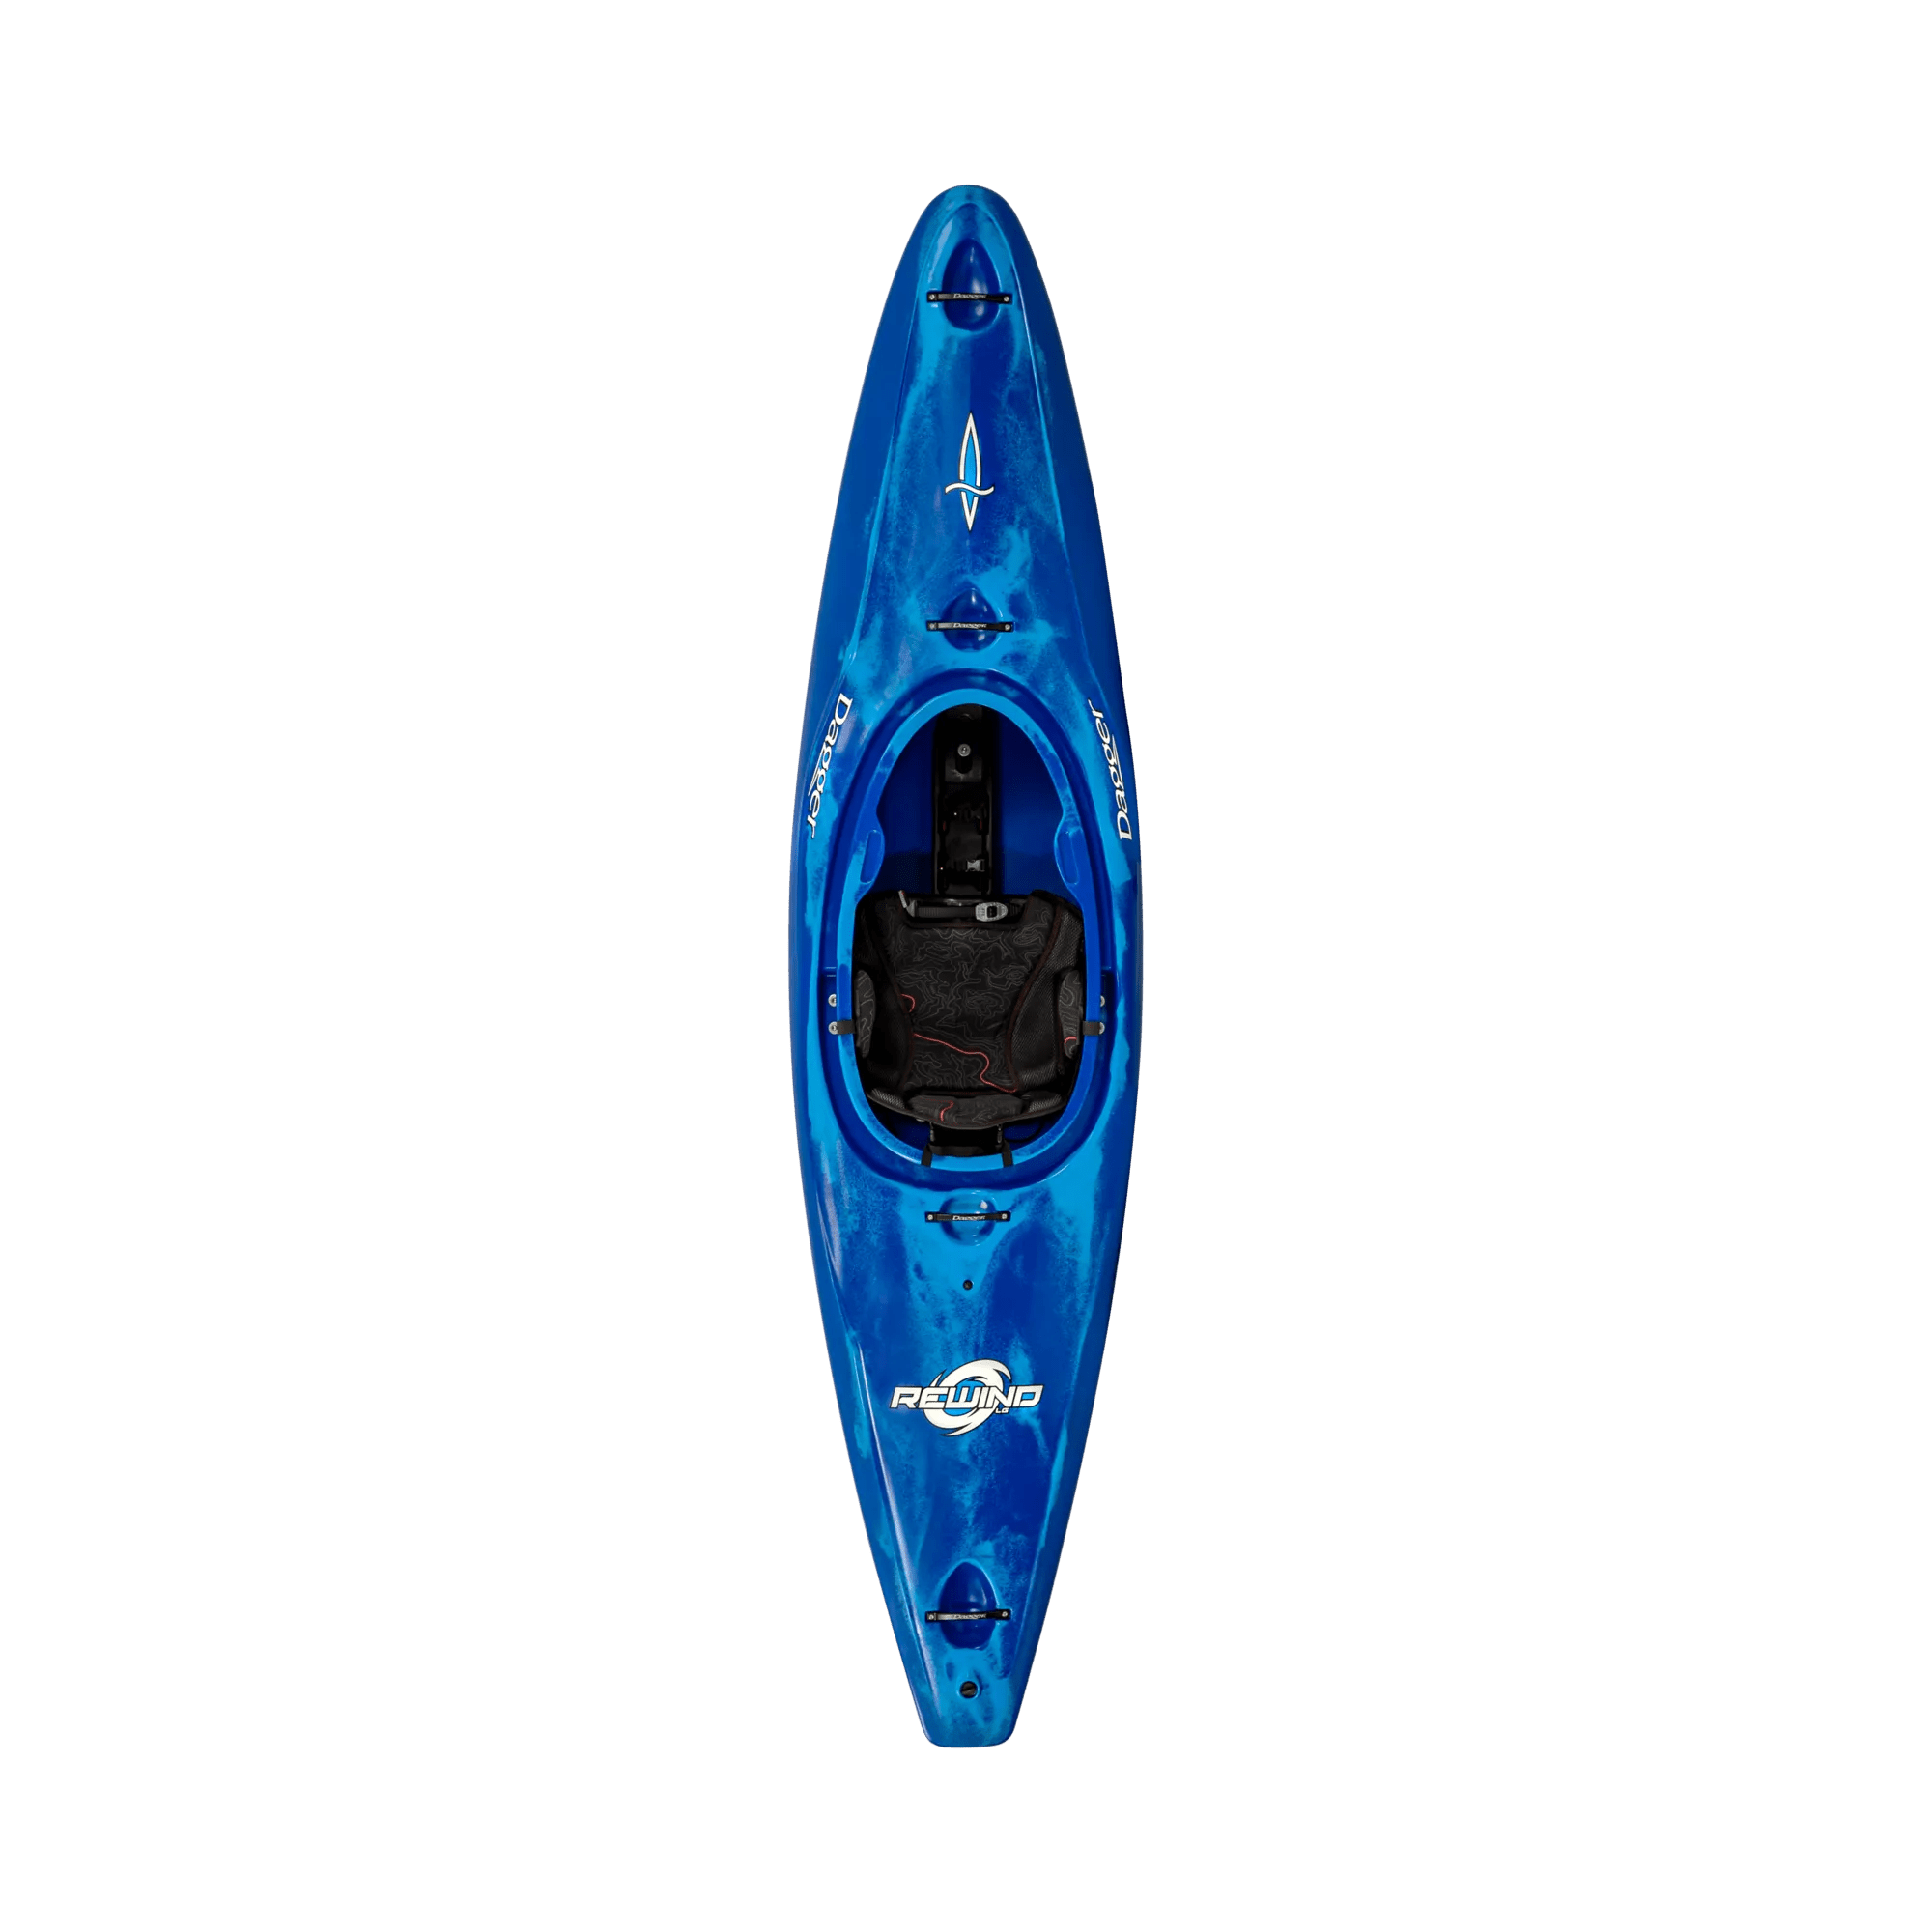 DAGGER - Rewind MD River Play Whitewater Kayak - Blue - 9010344206 - TOP